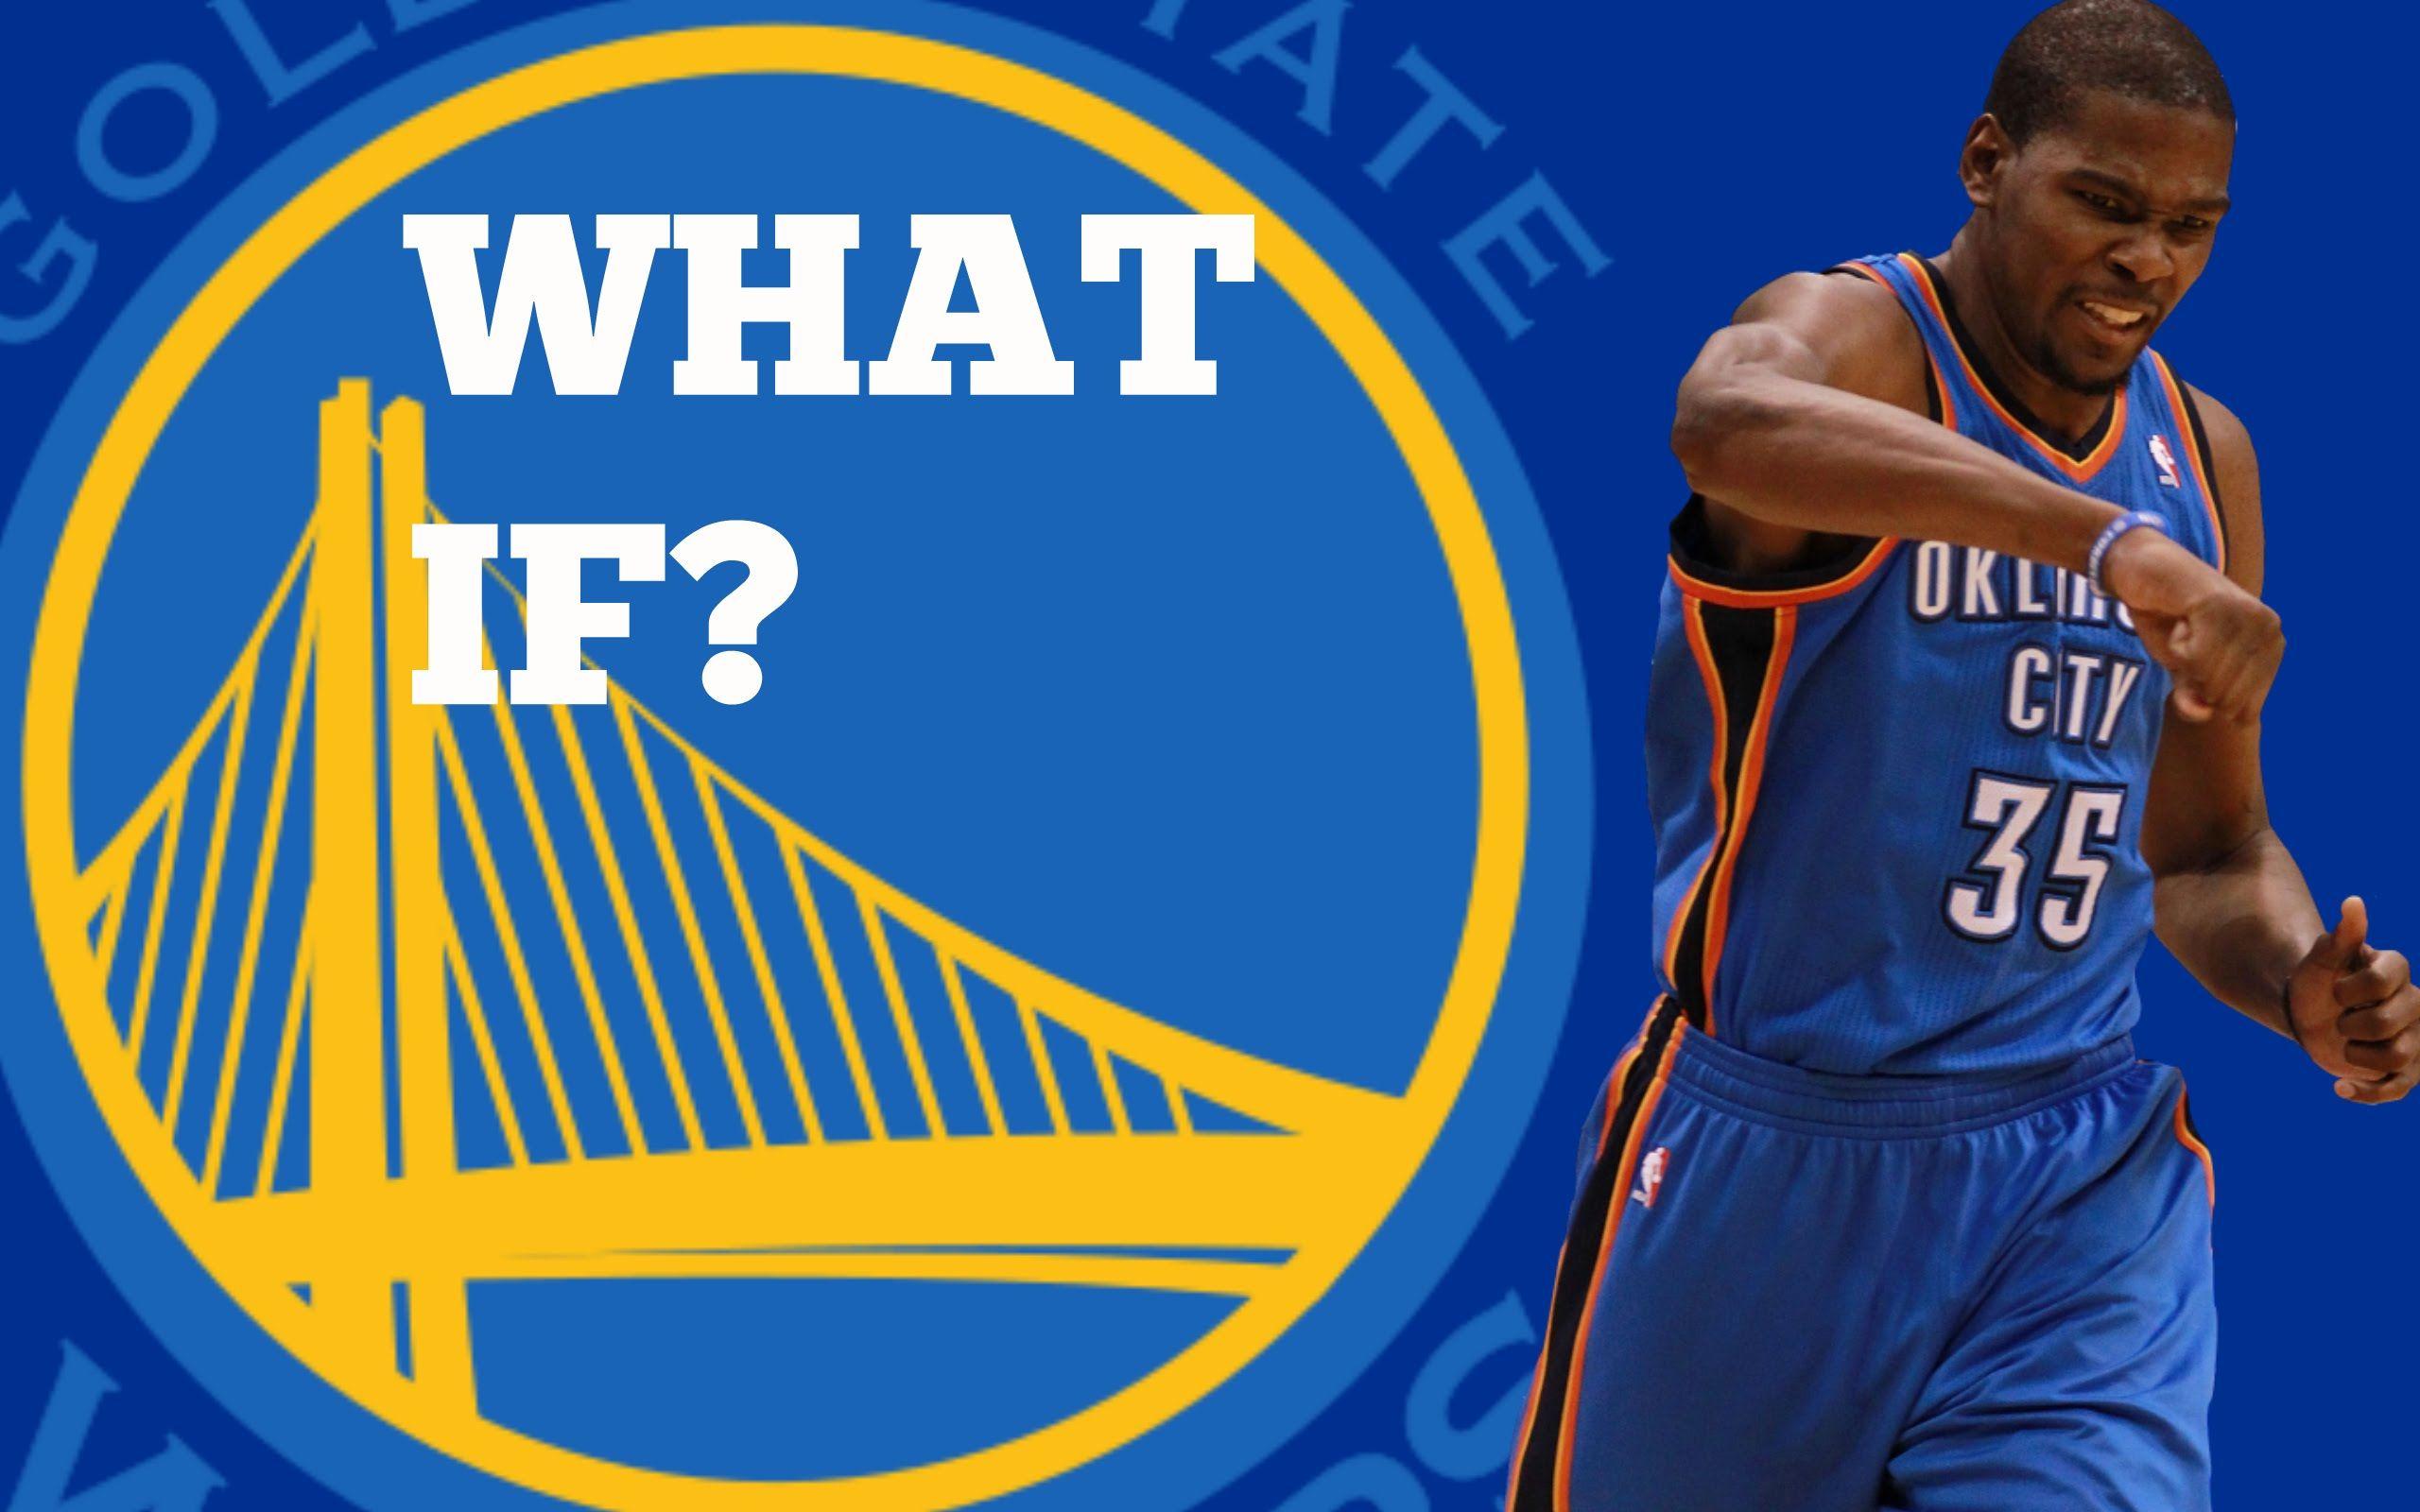 NBA 2K16: What If Kevin Durant Signs with the Golden State